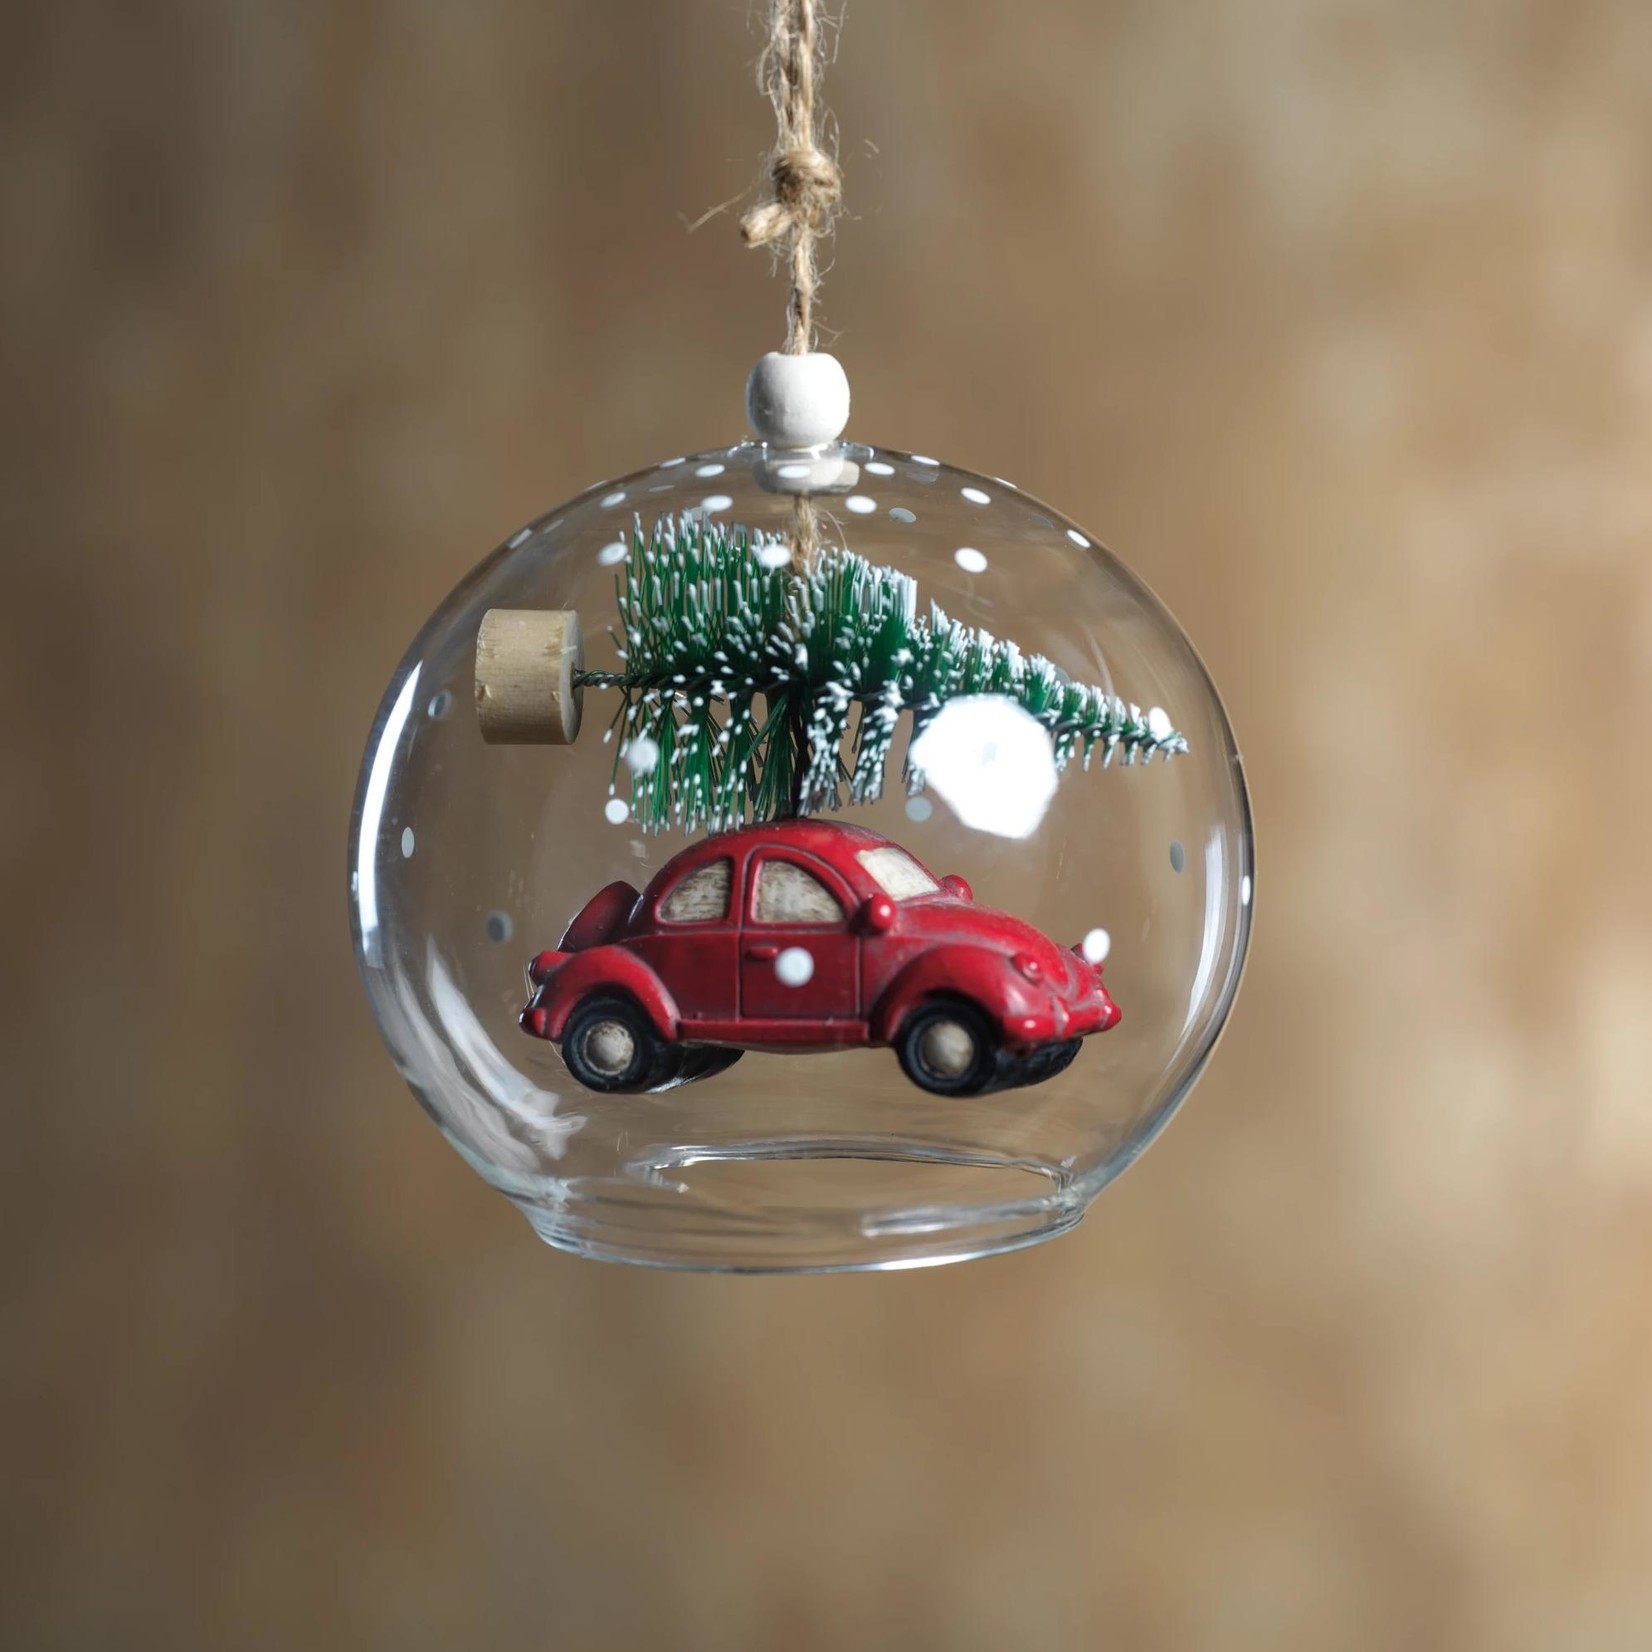 Zodax Tree on Car Ornament Red